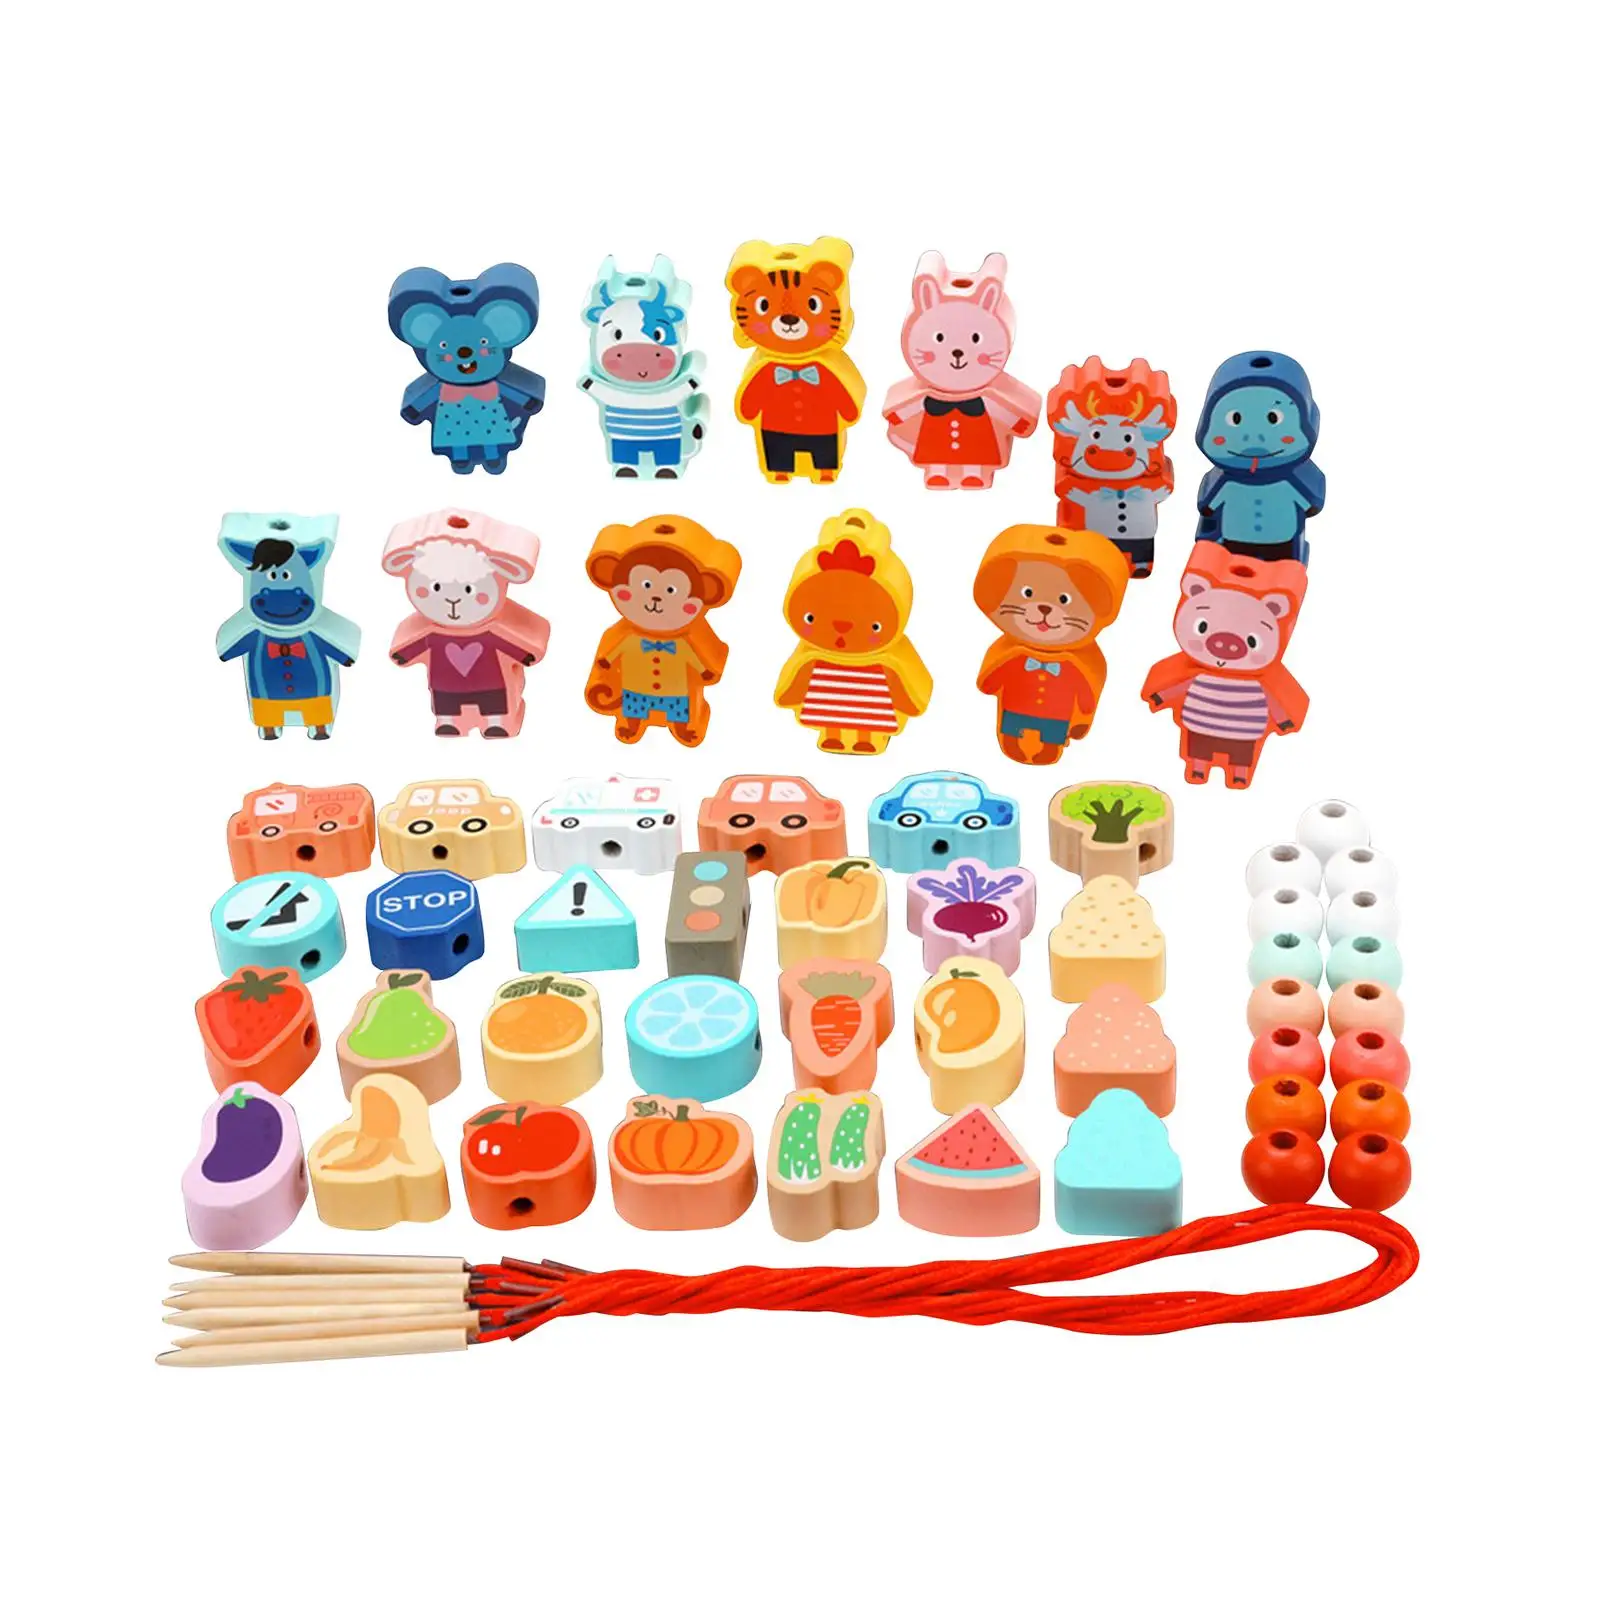 Cartoon Montessori Educational Wooden Lacing Beads Toys Preschool Learning for Toddler Child